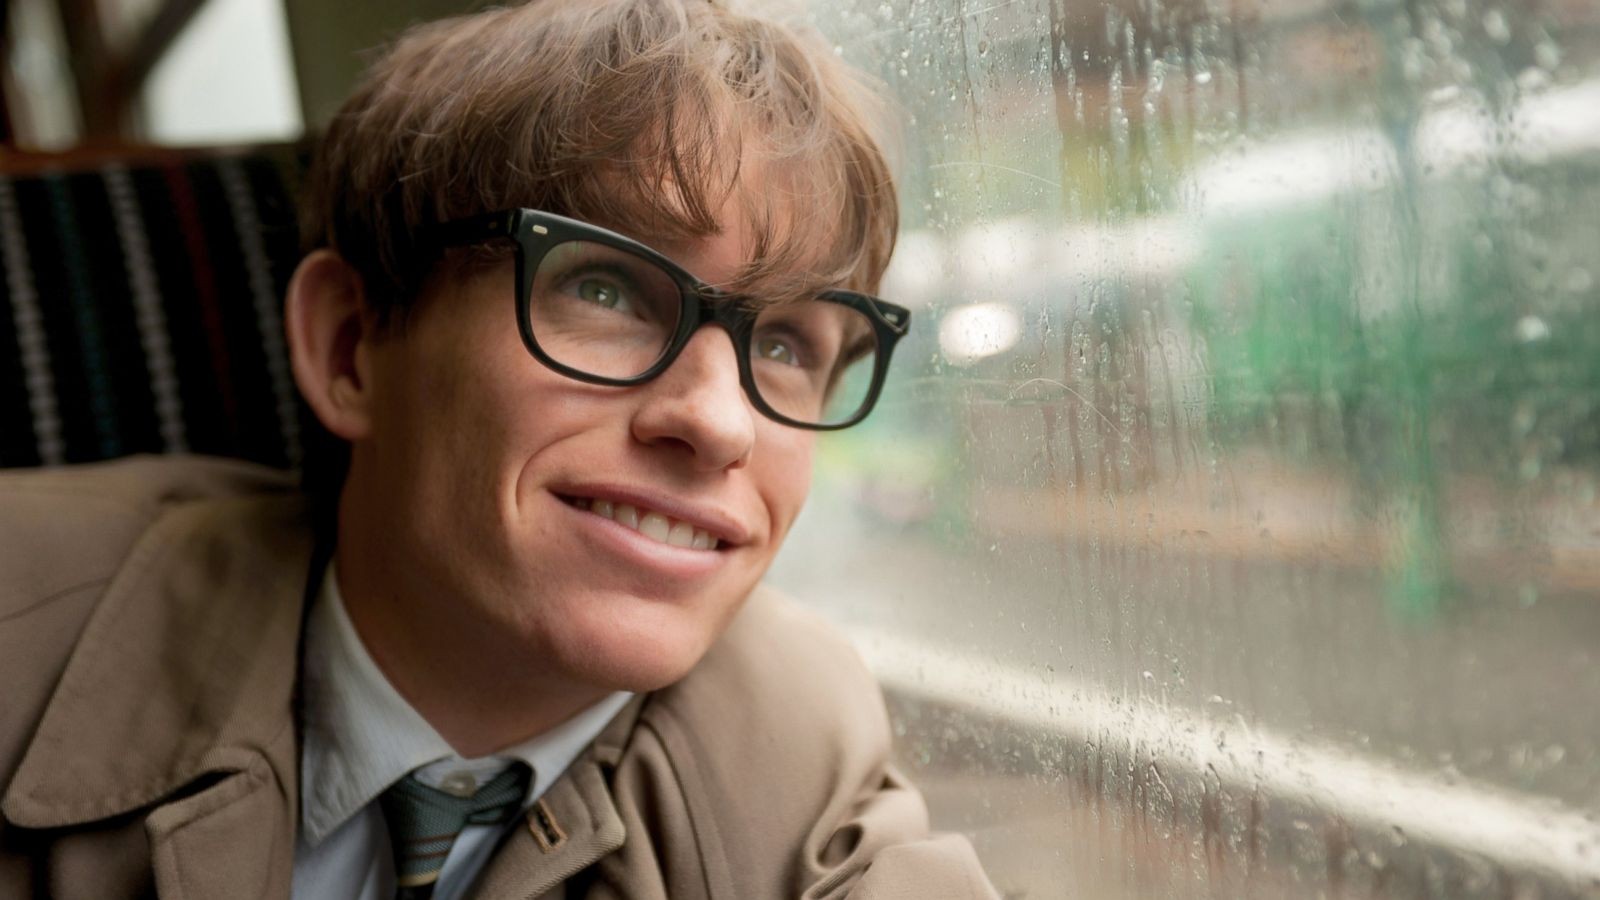 Eddie Redmayne could not sleep for a night before filming The Theory of Everything